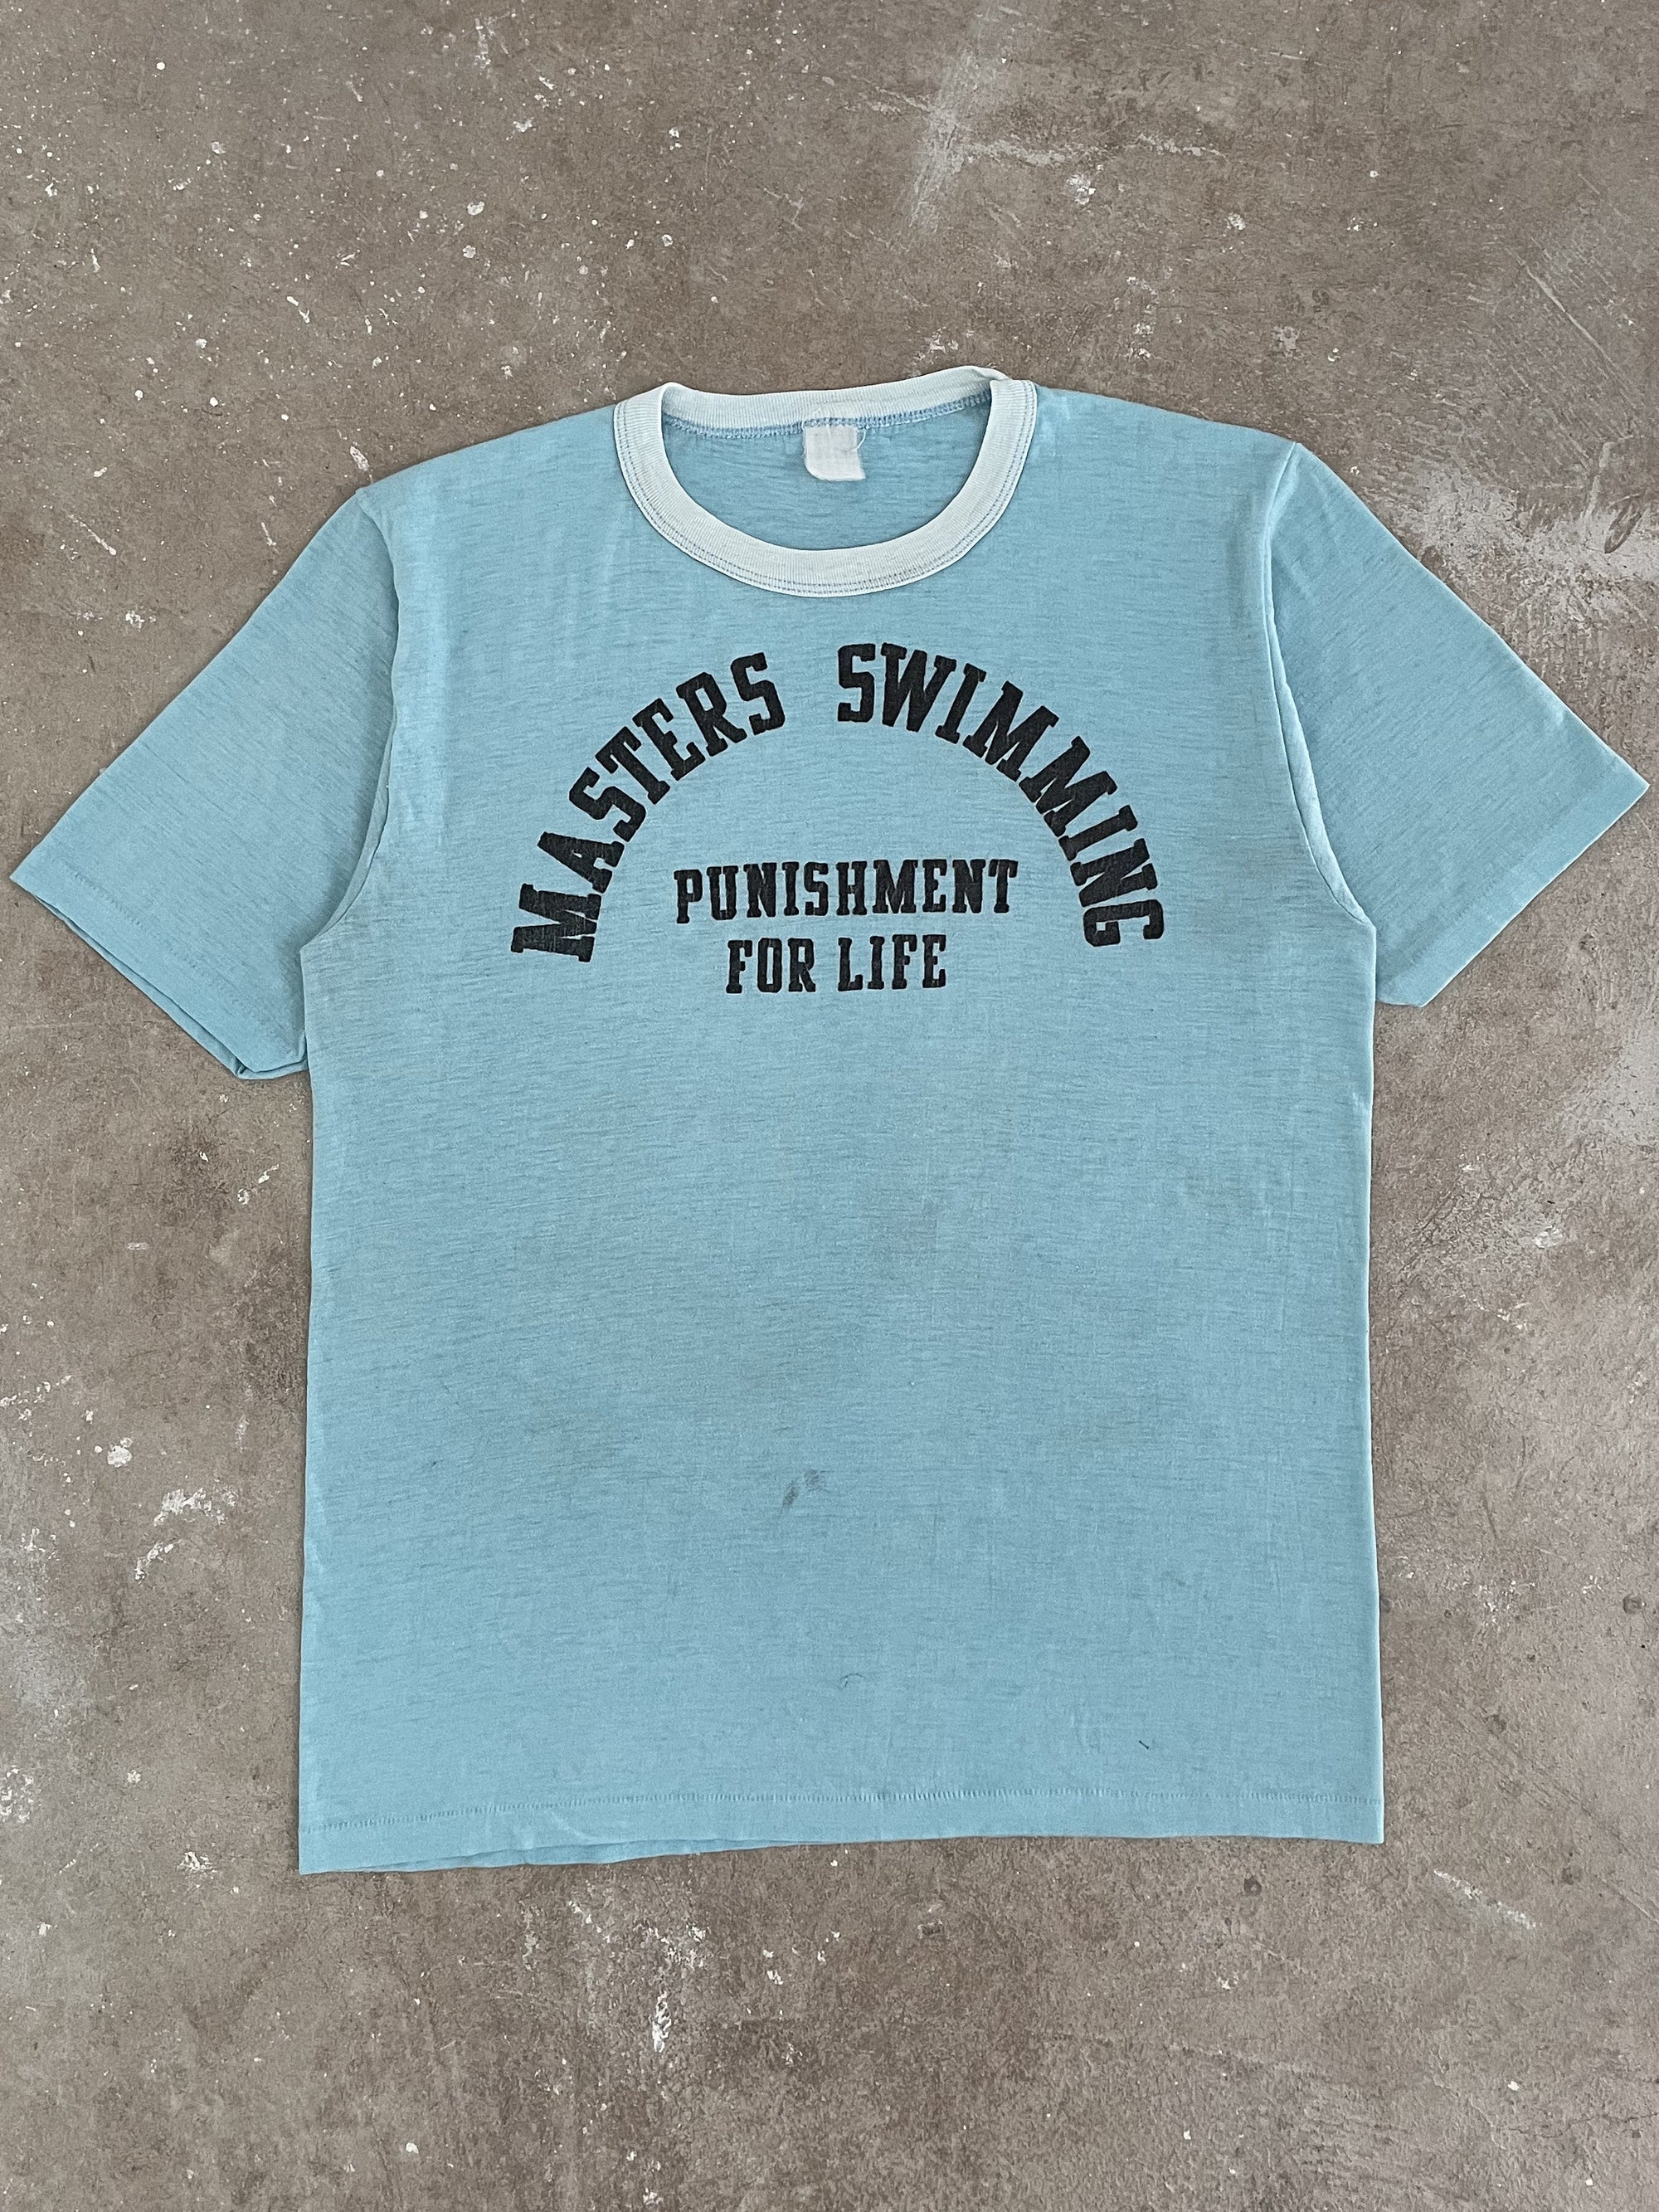 1980s “Punishment For Life” Single Stitched Tee (M)